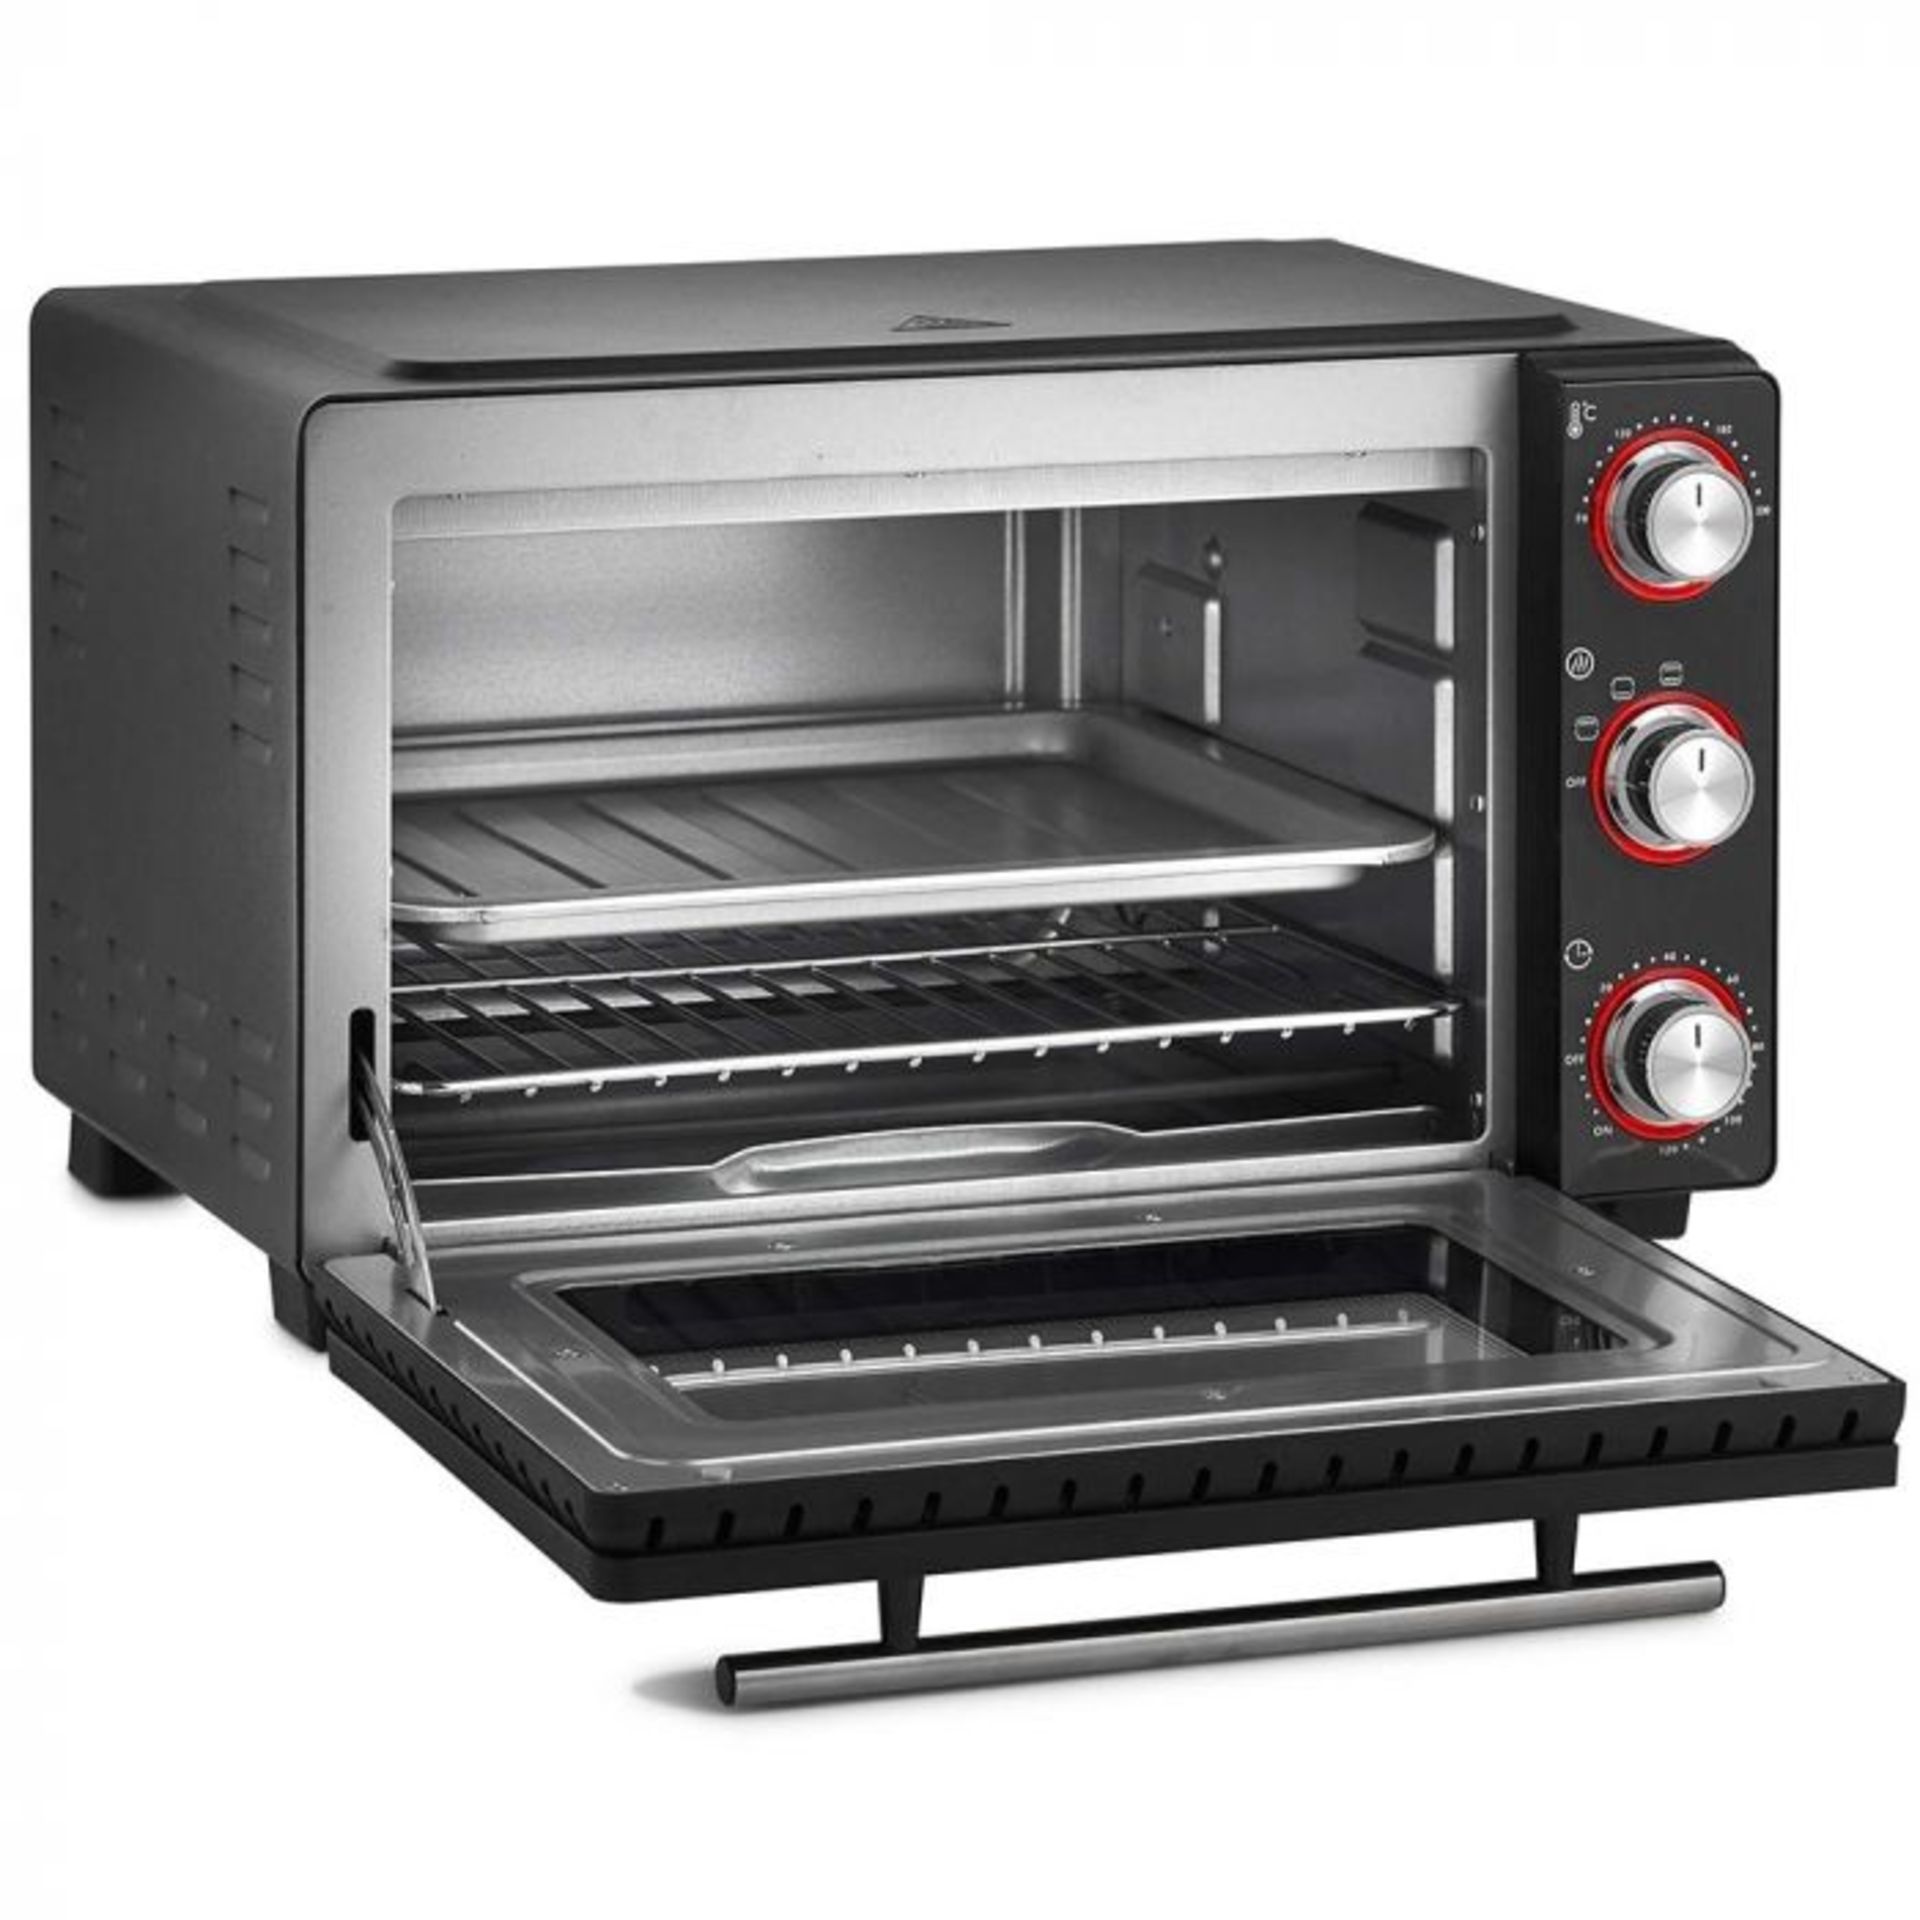 (V110) 28L Mini Oven Cooker & Grill 28L capacity and unobtrusive size makes it ideal for space... - Image 3 of 4